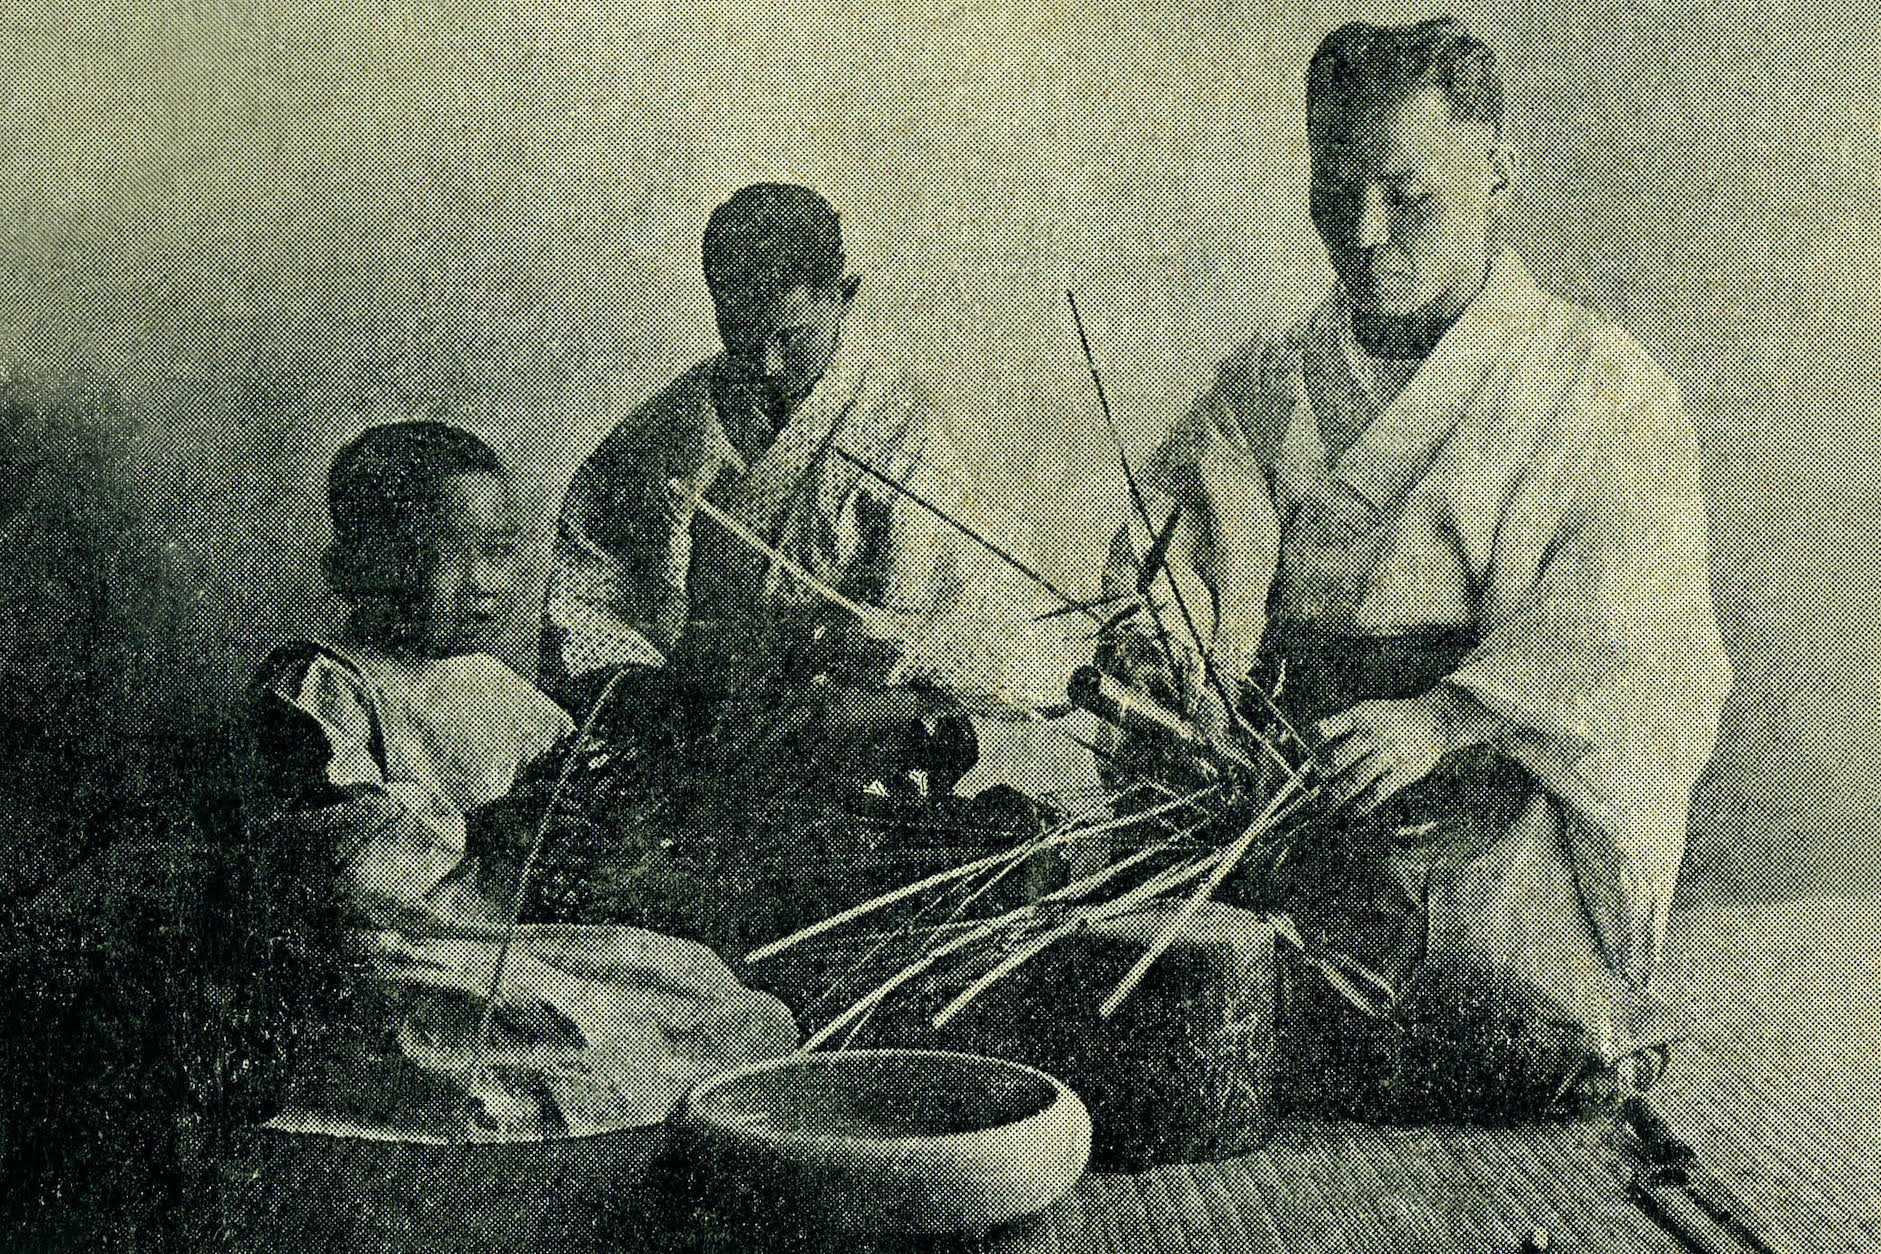 Chikuunsai II with his family, learning how to weave bamboo baskets